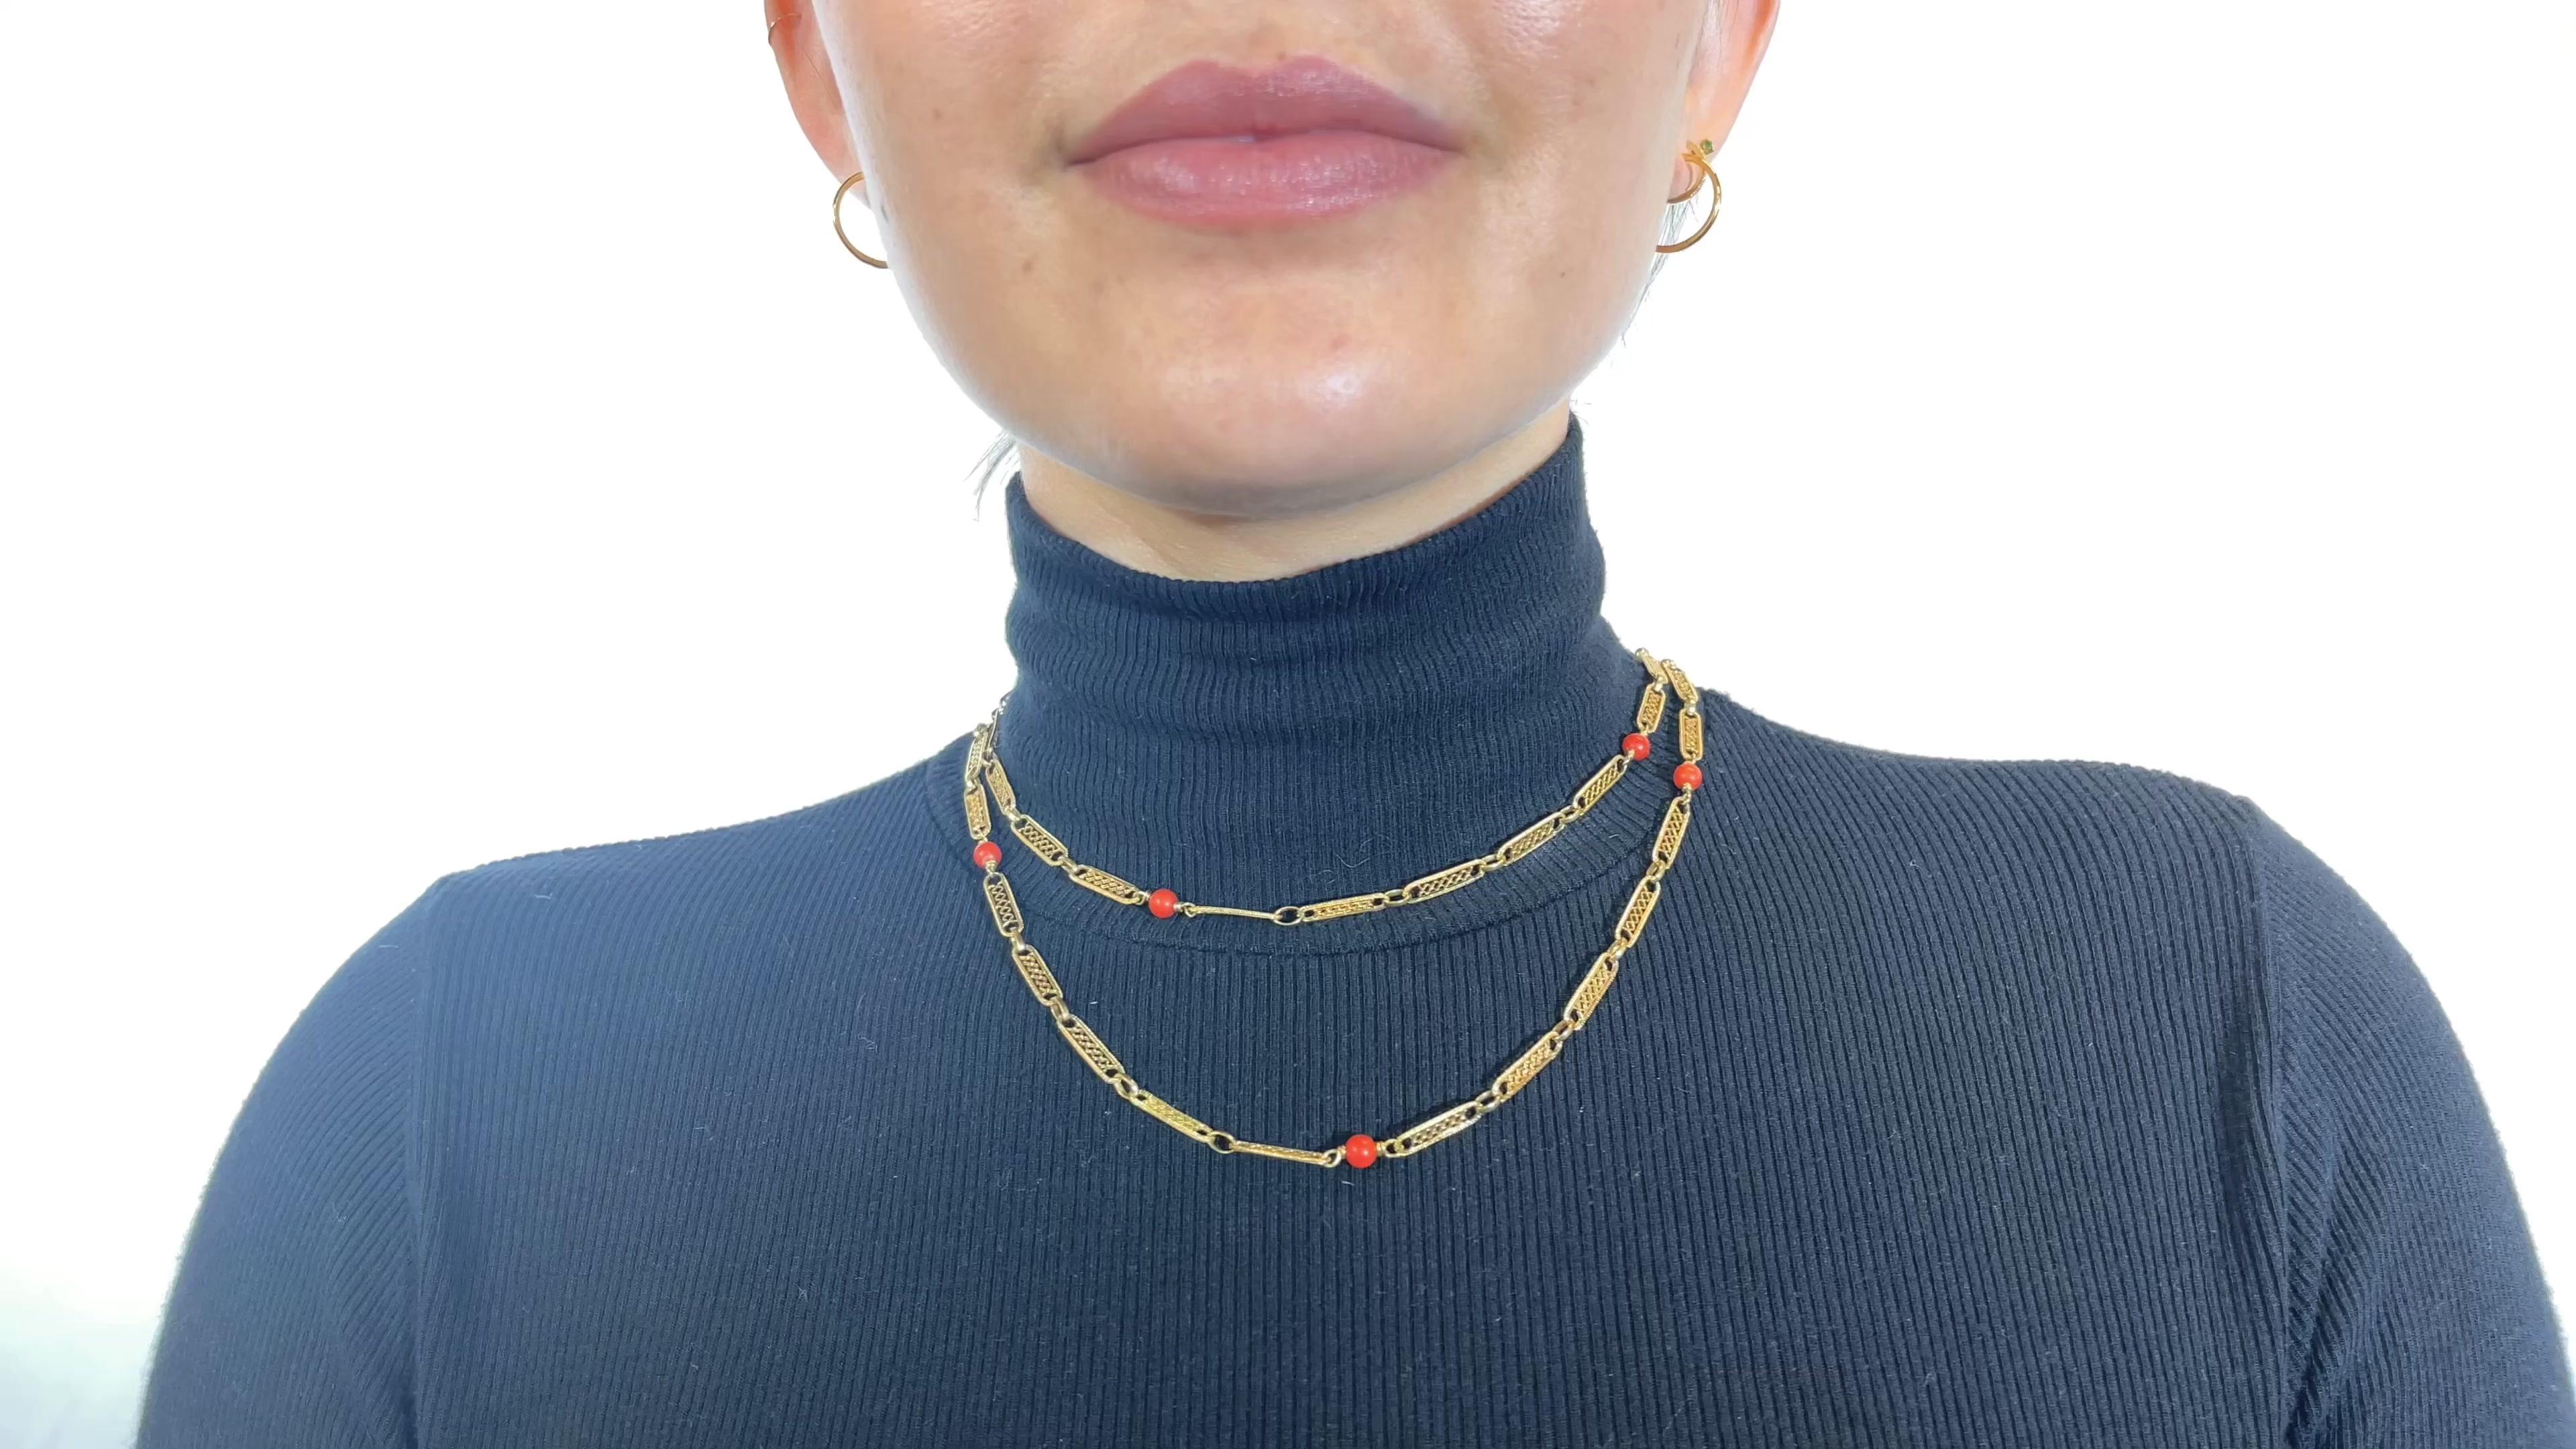 One Vintage Italian Coral 18 Karat Gold Fancy Link Necklace. Featuring eight polished coral beads. Crafted in 18 karat yellow gold with Italian hallmarks and maker's mark. Circa 1970s. 

About The Piece: Fun, colorful and truly antique - this